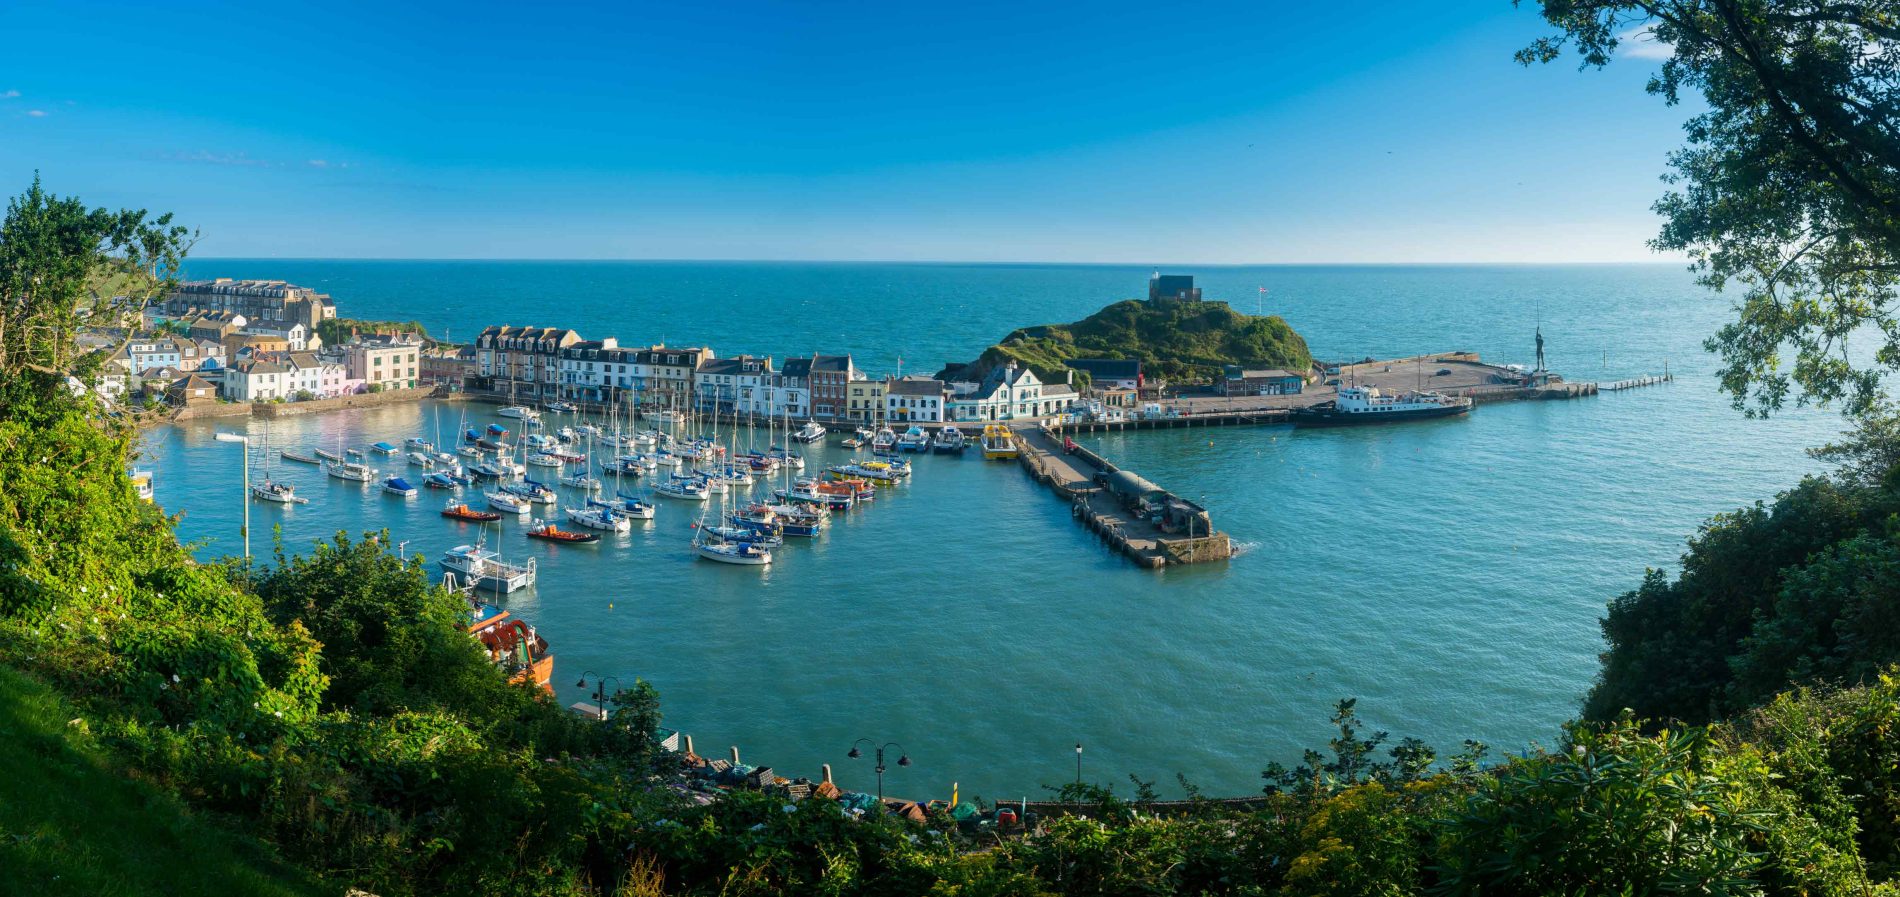 Holiday Cottages at Ilfracombe Harbour North Devon